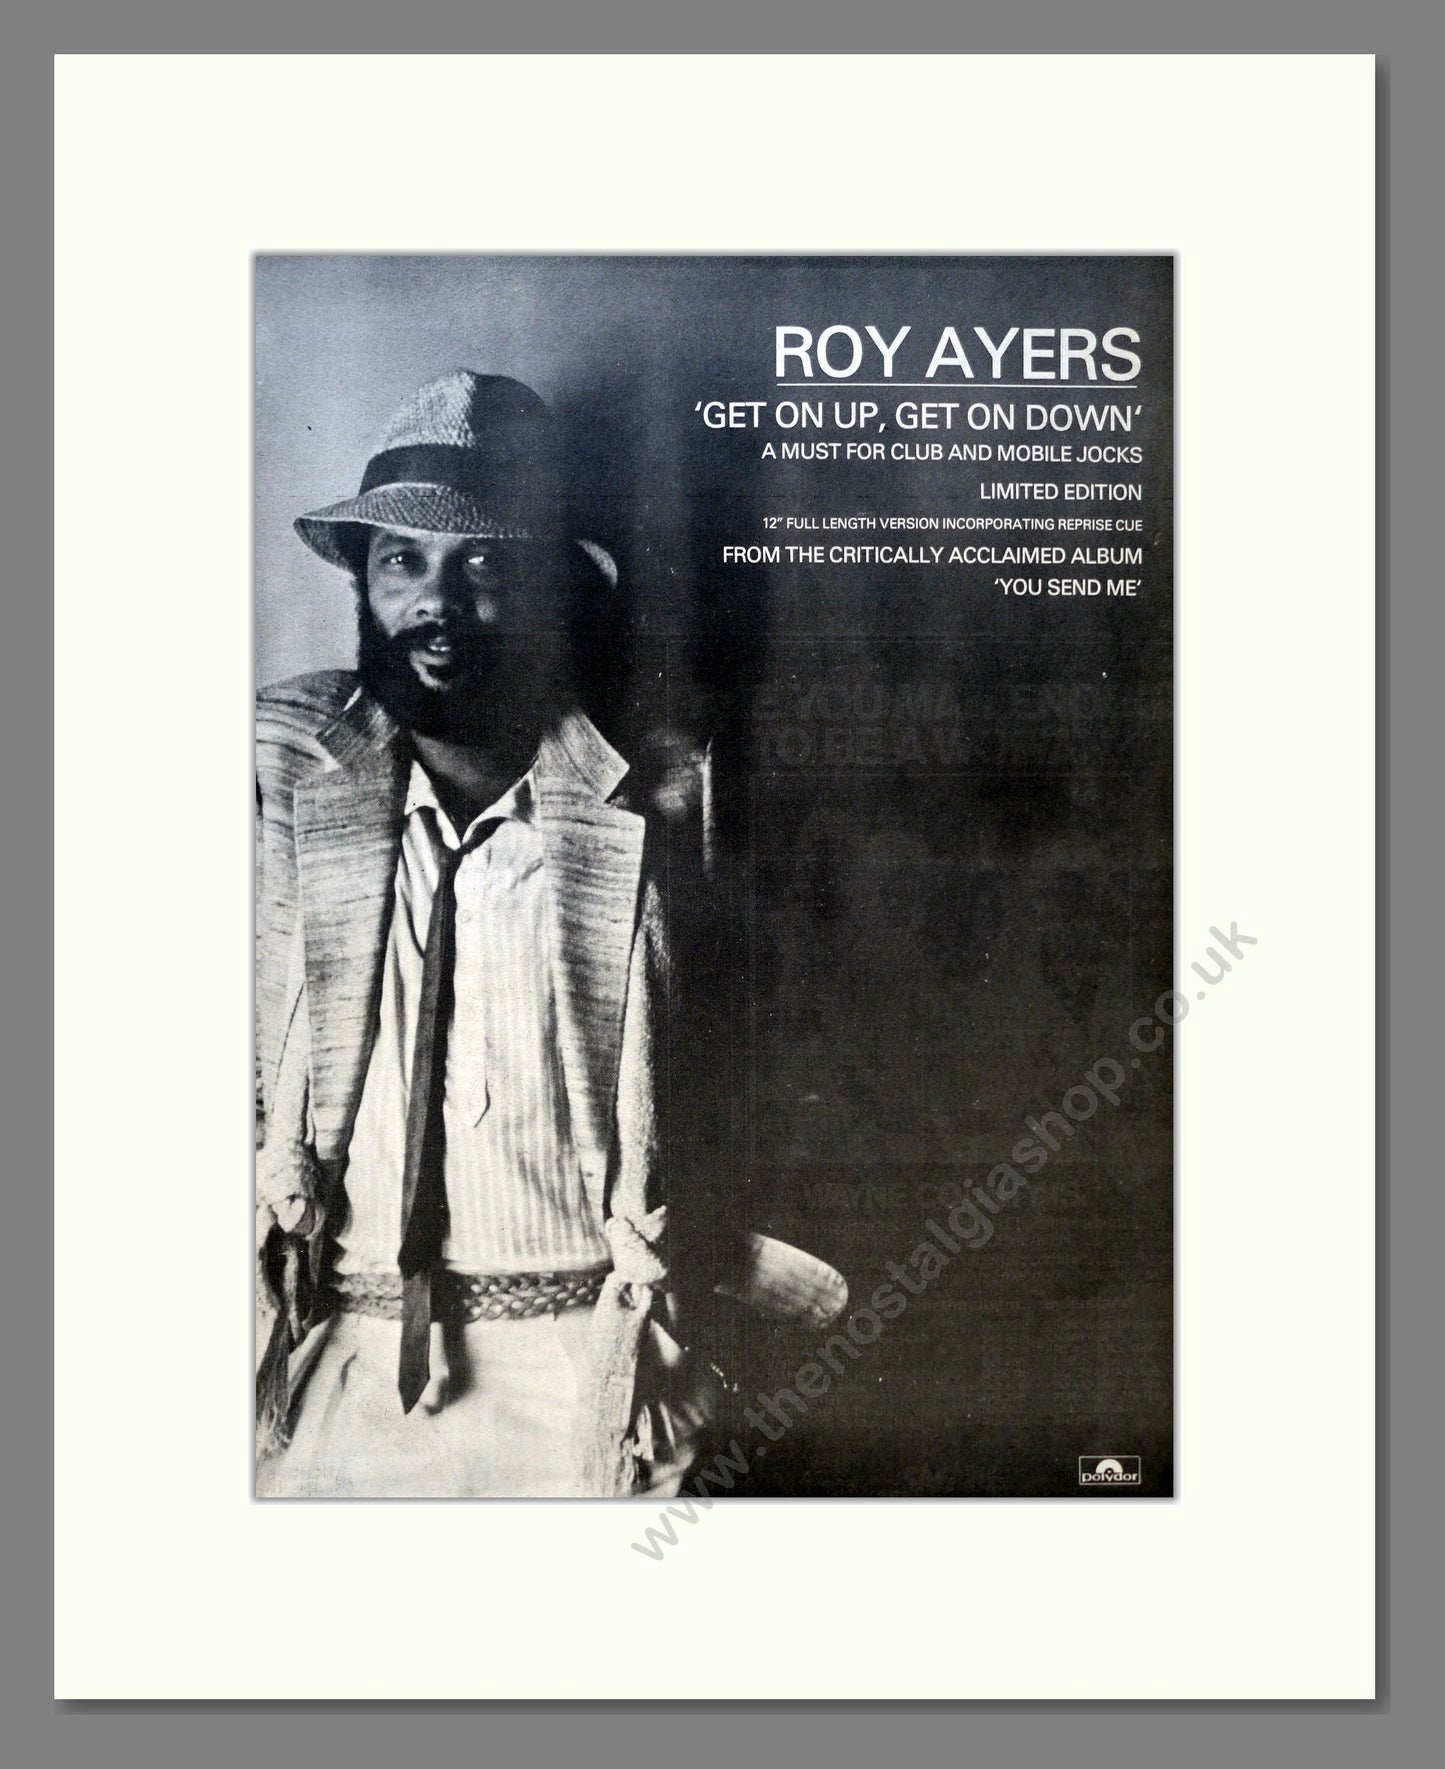 Roy Ayers - Get On Up Get On Down. Vintage Advert 1978 (ref AD18187)